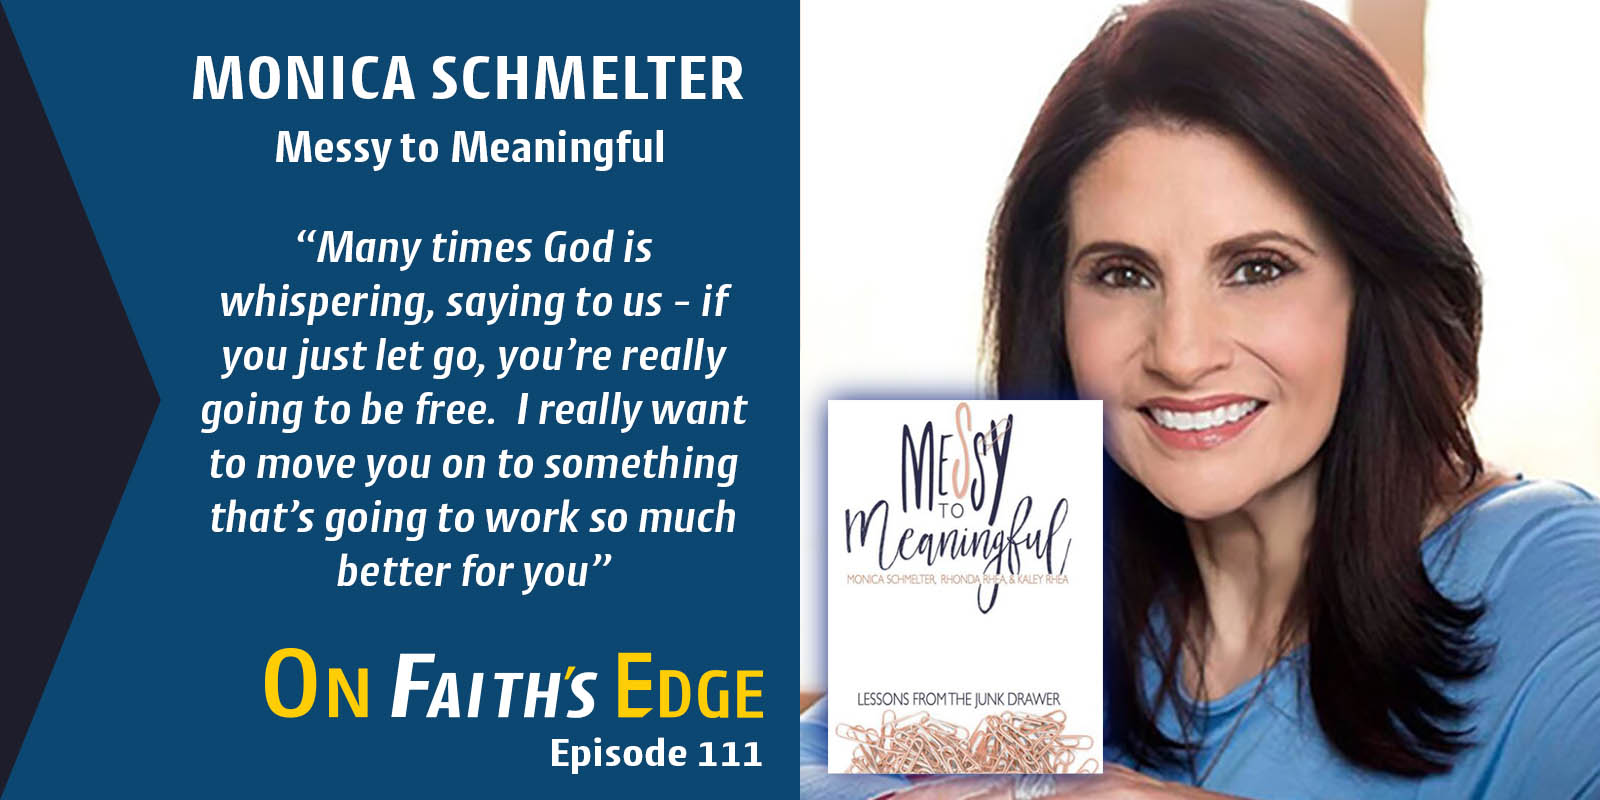 Take Your Life From Messy to Meaningful with Monica Schmelter